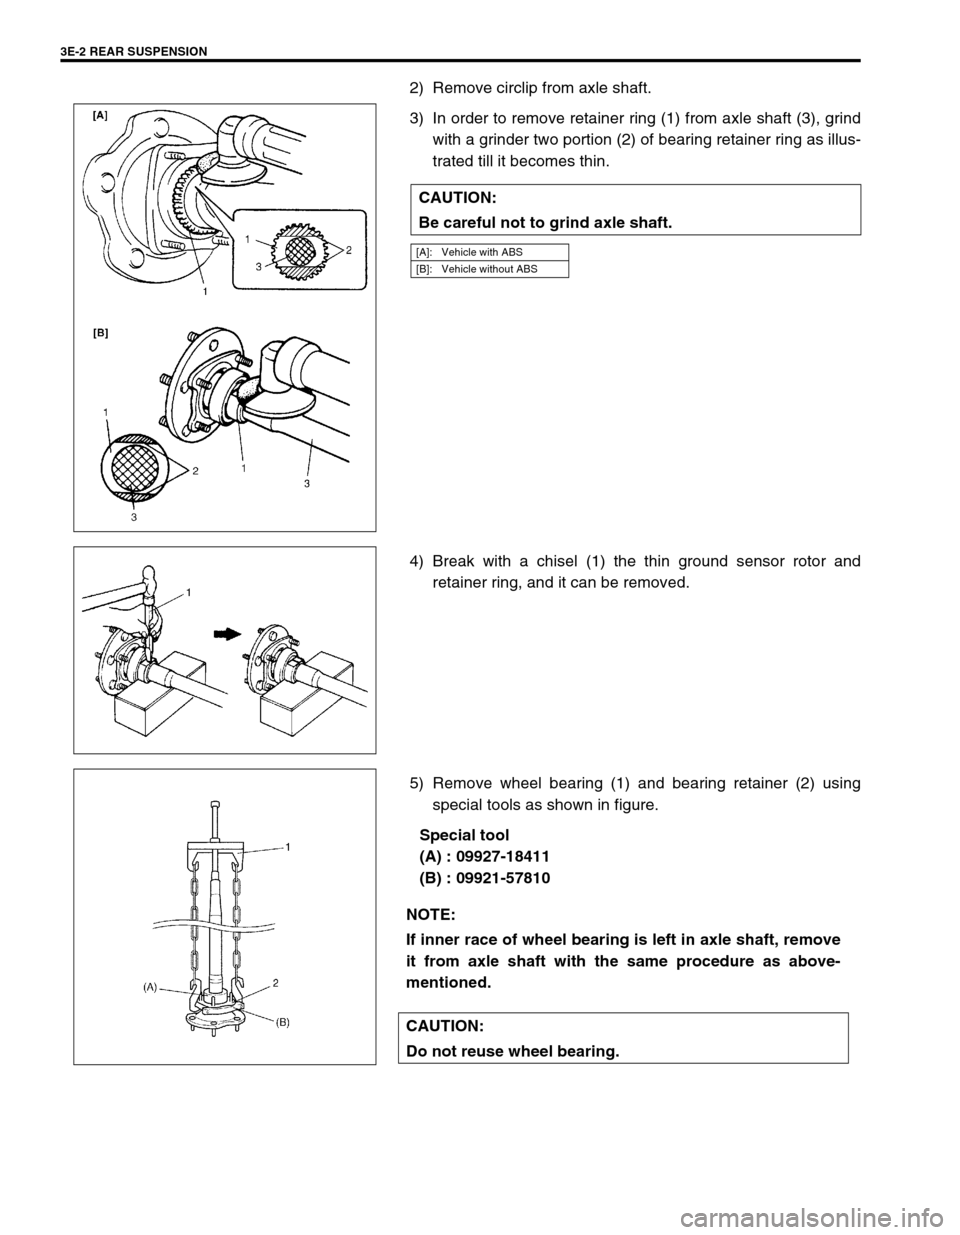 SUZUKI GRAND VITARA 1999 2.G Owners Manual 3E-2 REAR SUSPENSION
2) Remove circlip from axle shaft.
3) In order to remove retainer ring (1) from axle shaft (3), grind
with a grinder two portion (2) of bearing retainer ring as illus-
trated till